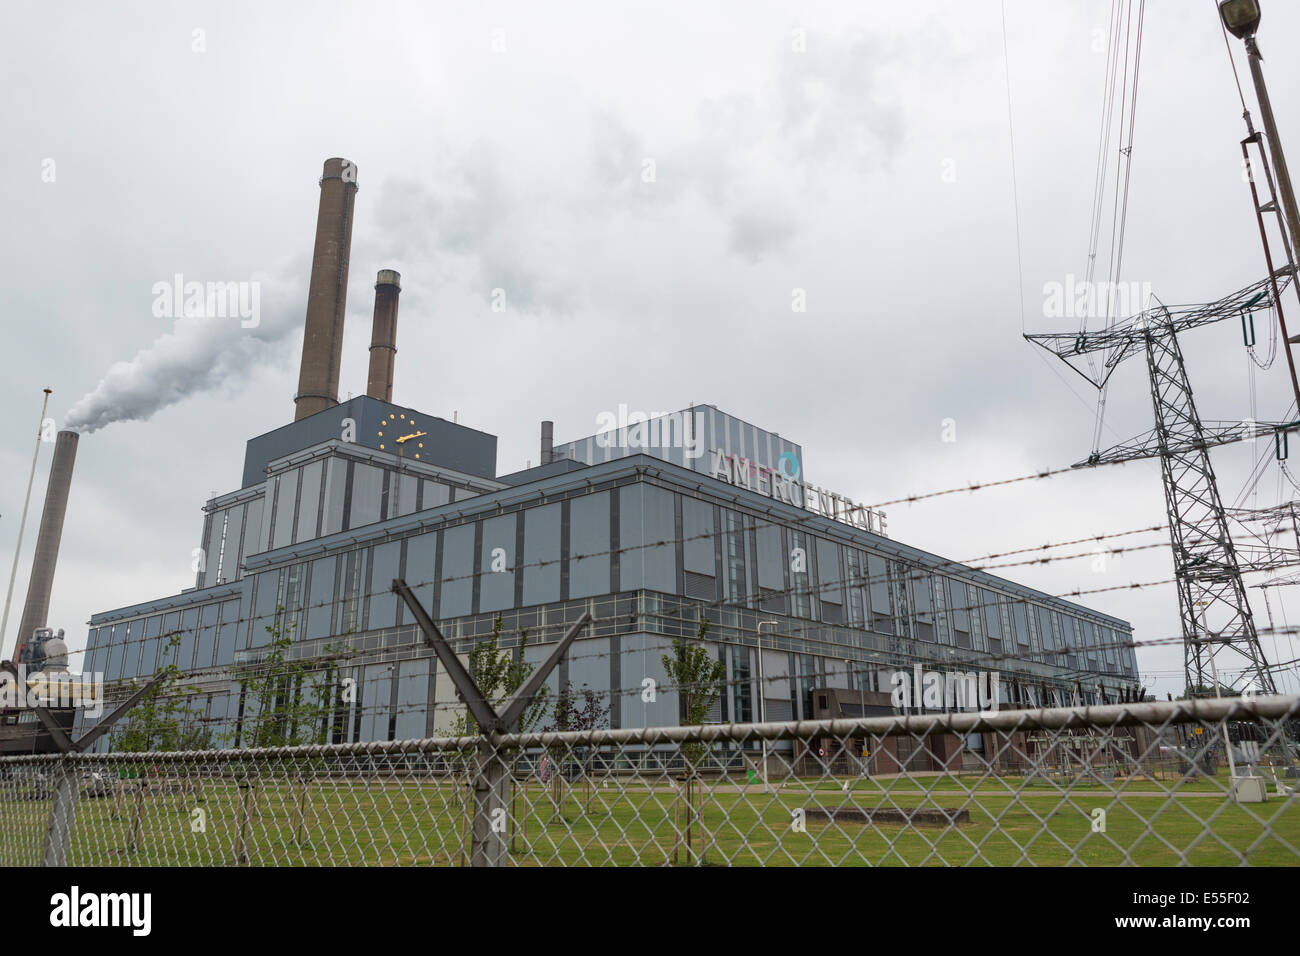 Amercentrale, coal-fired power plant station owned by Essent in Geertruidenberg in the Netherlands Stock Photo